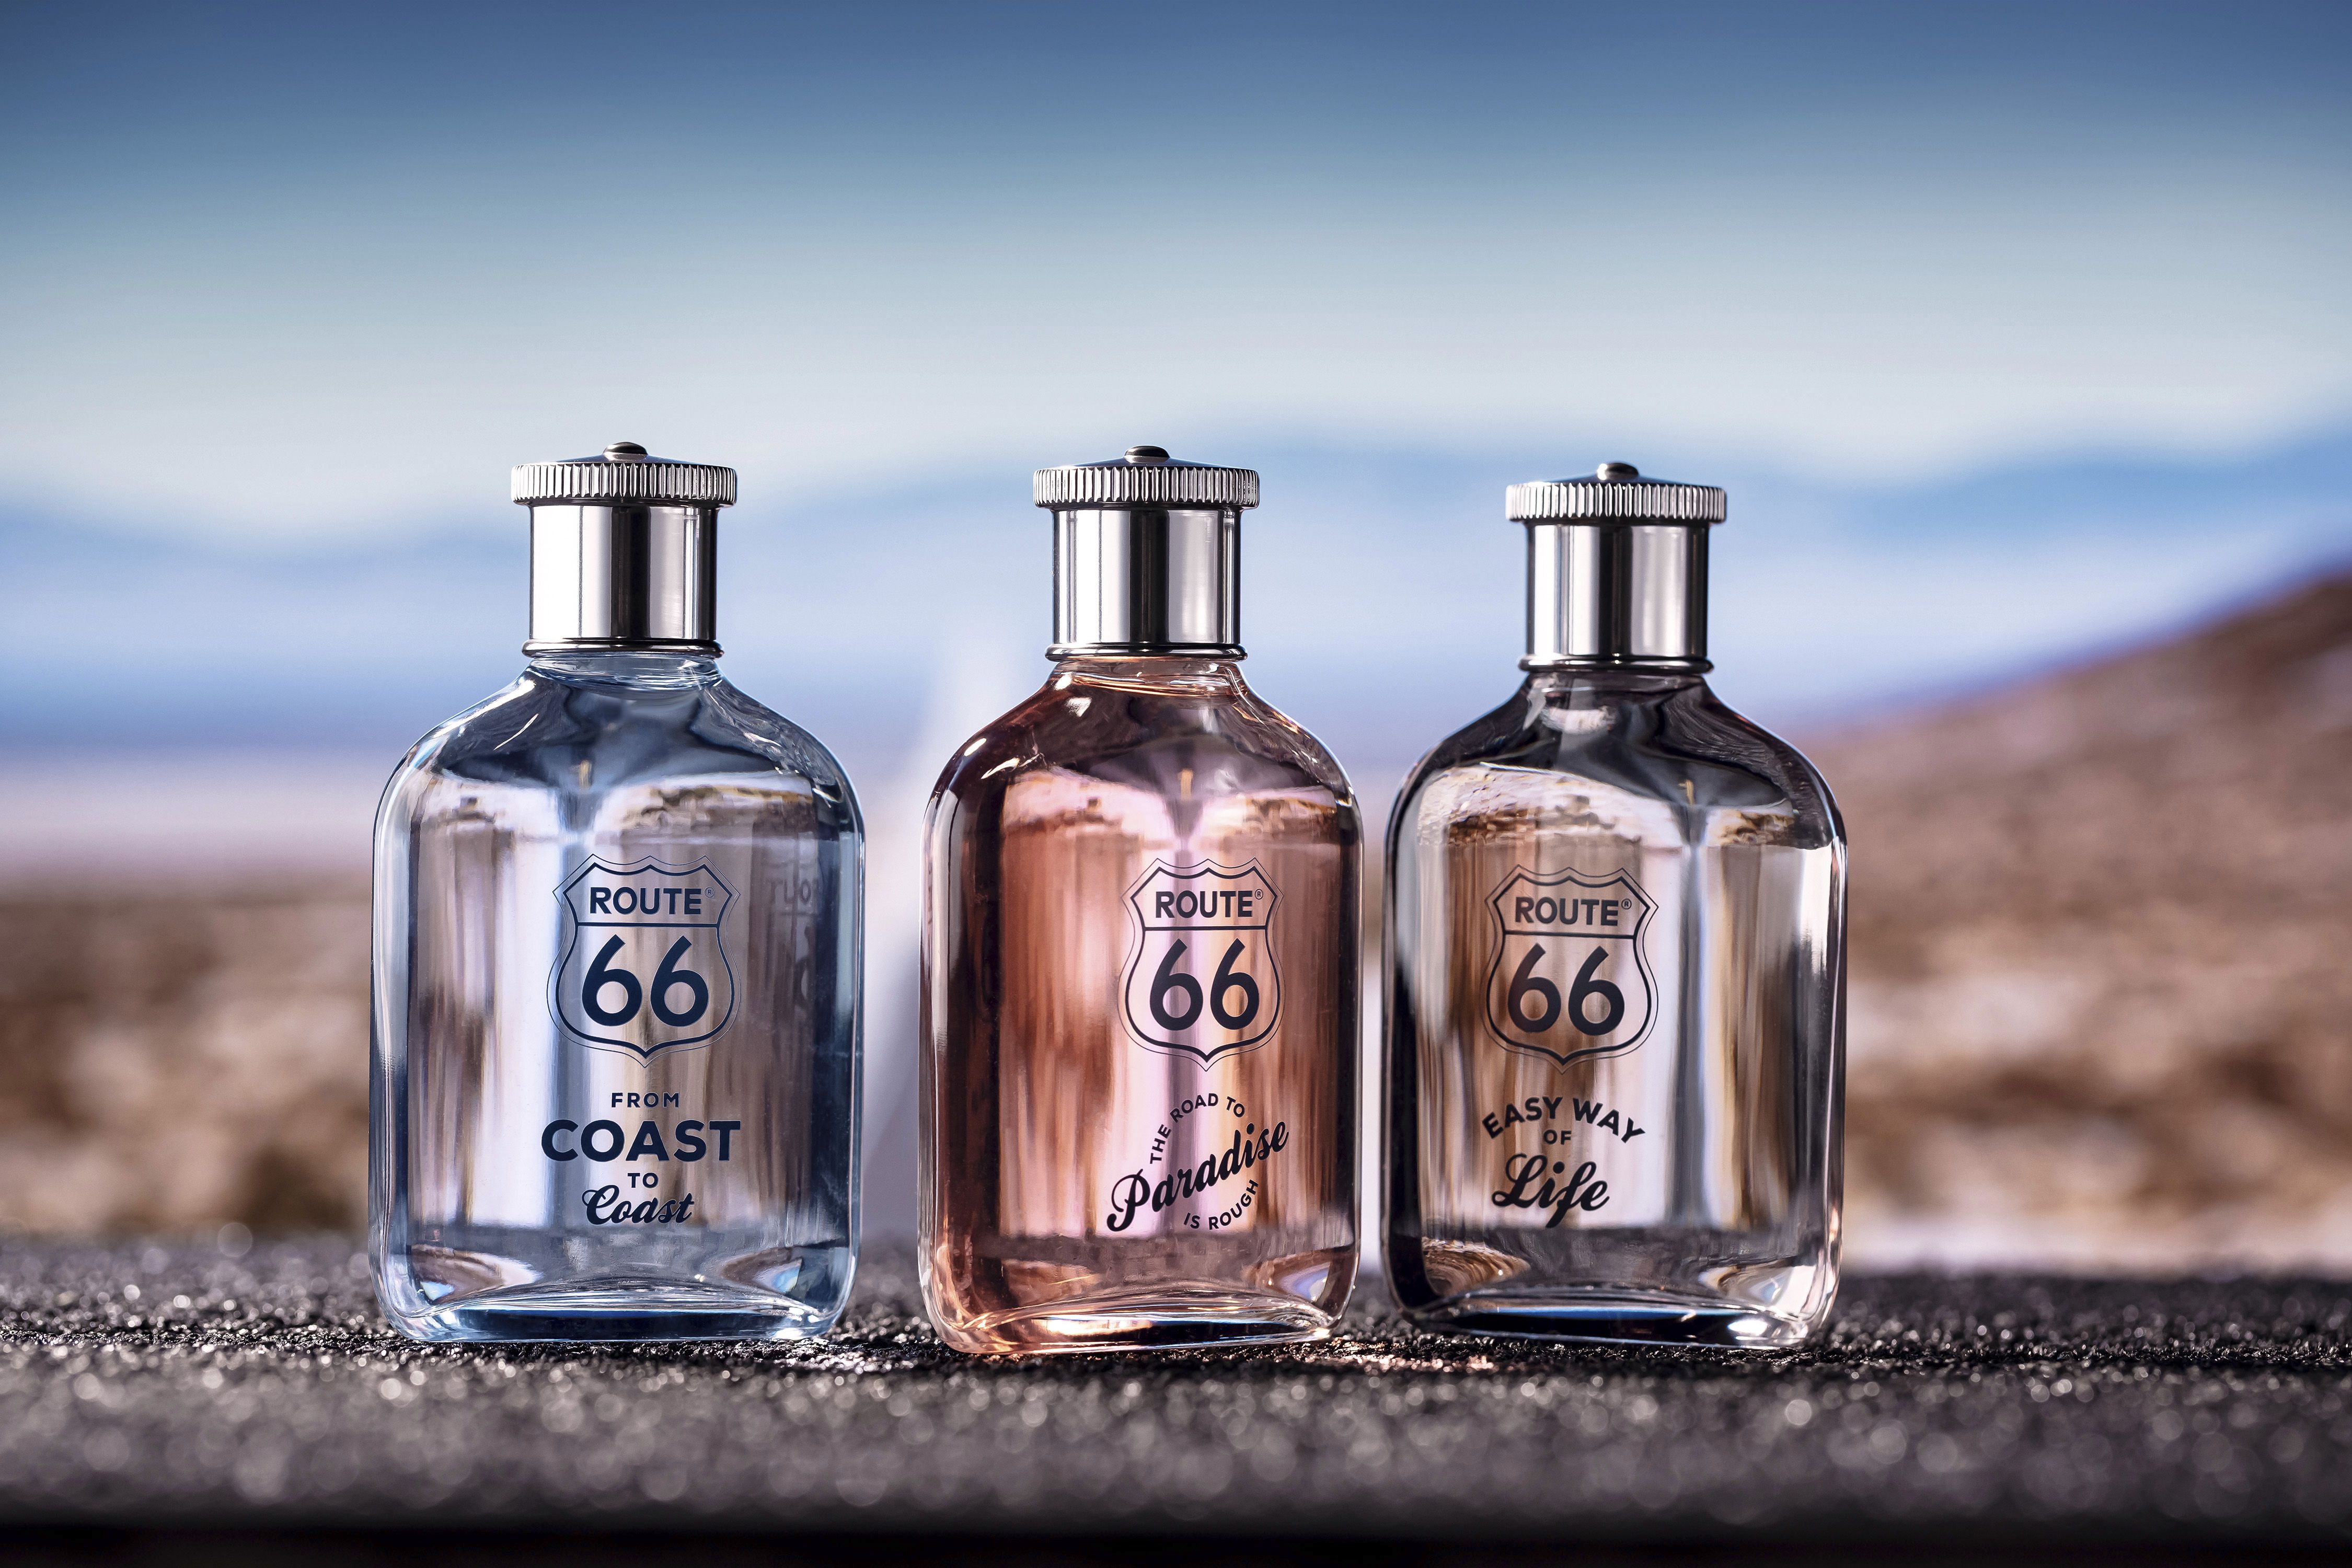 From Coast to Coast Route 66 cologne - a fragrance for men 2021